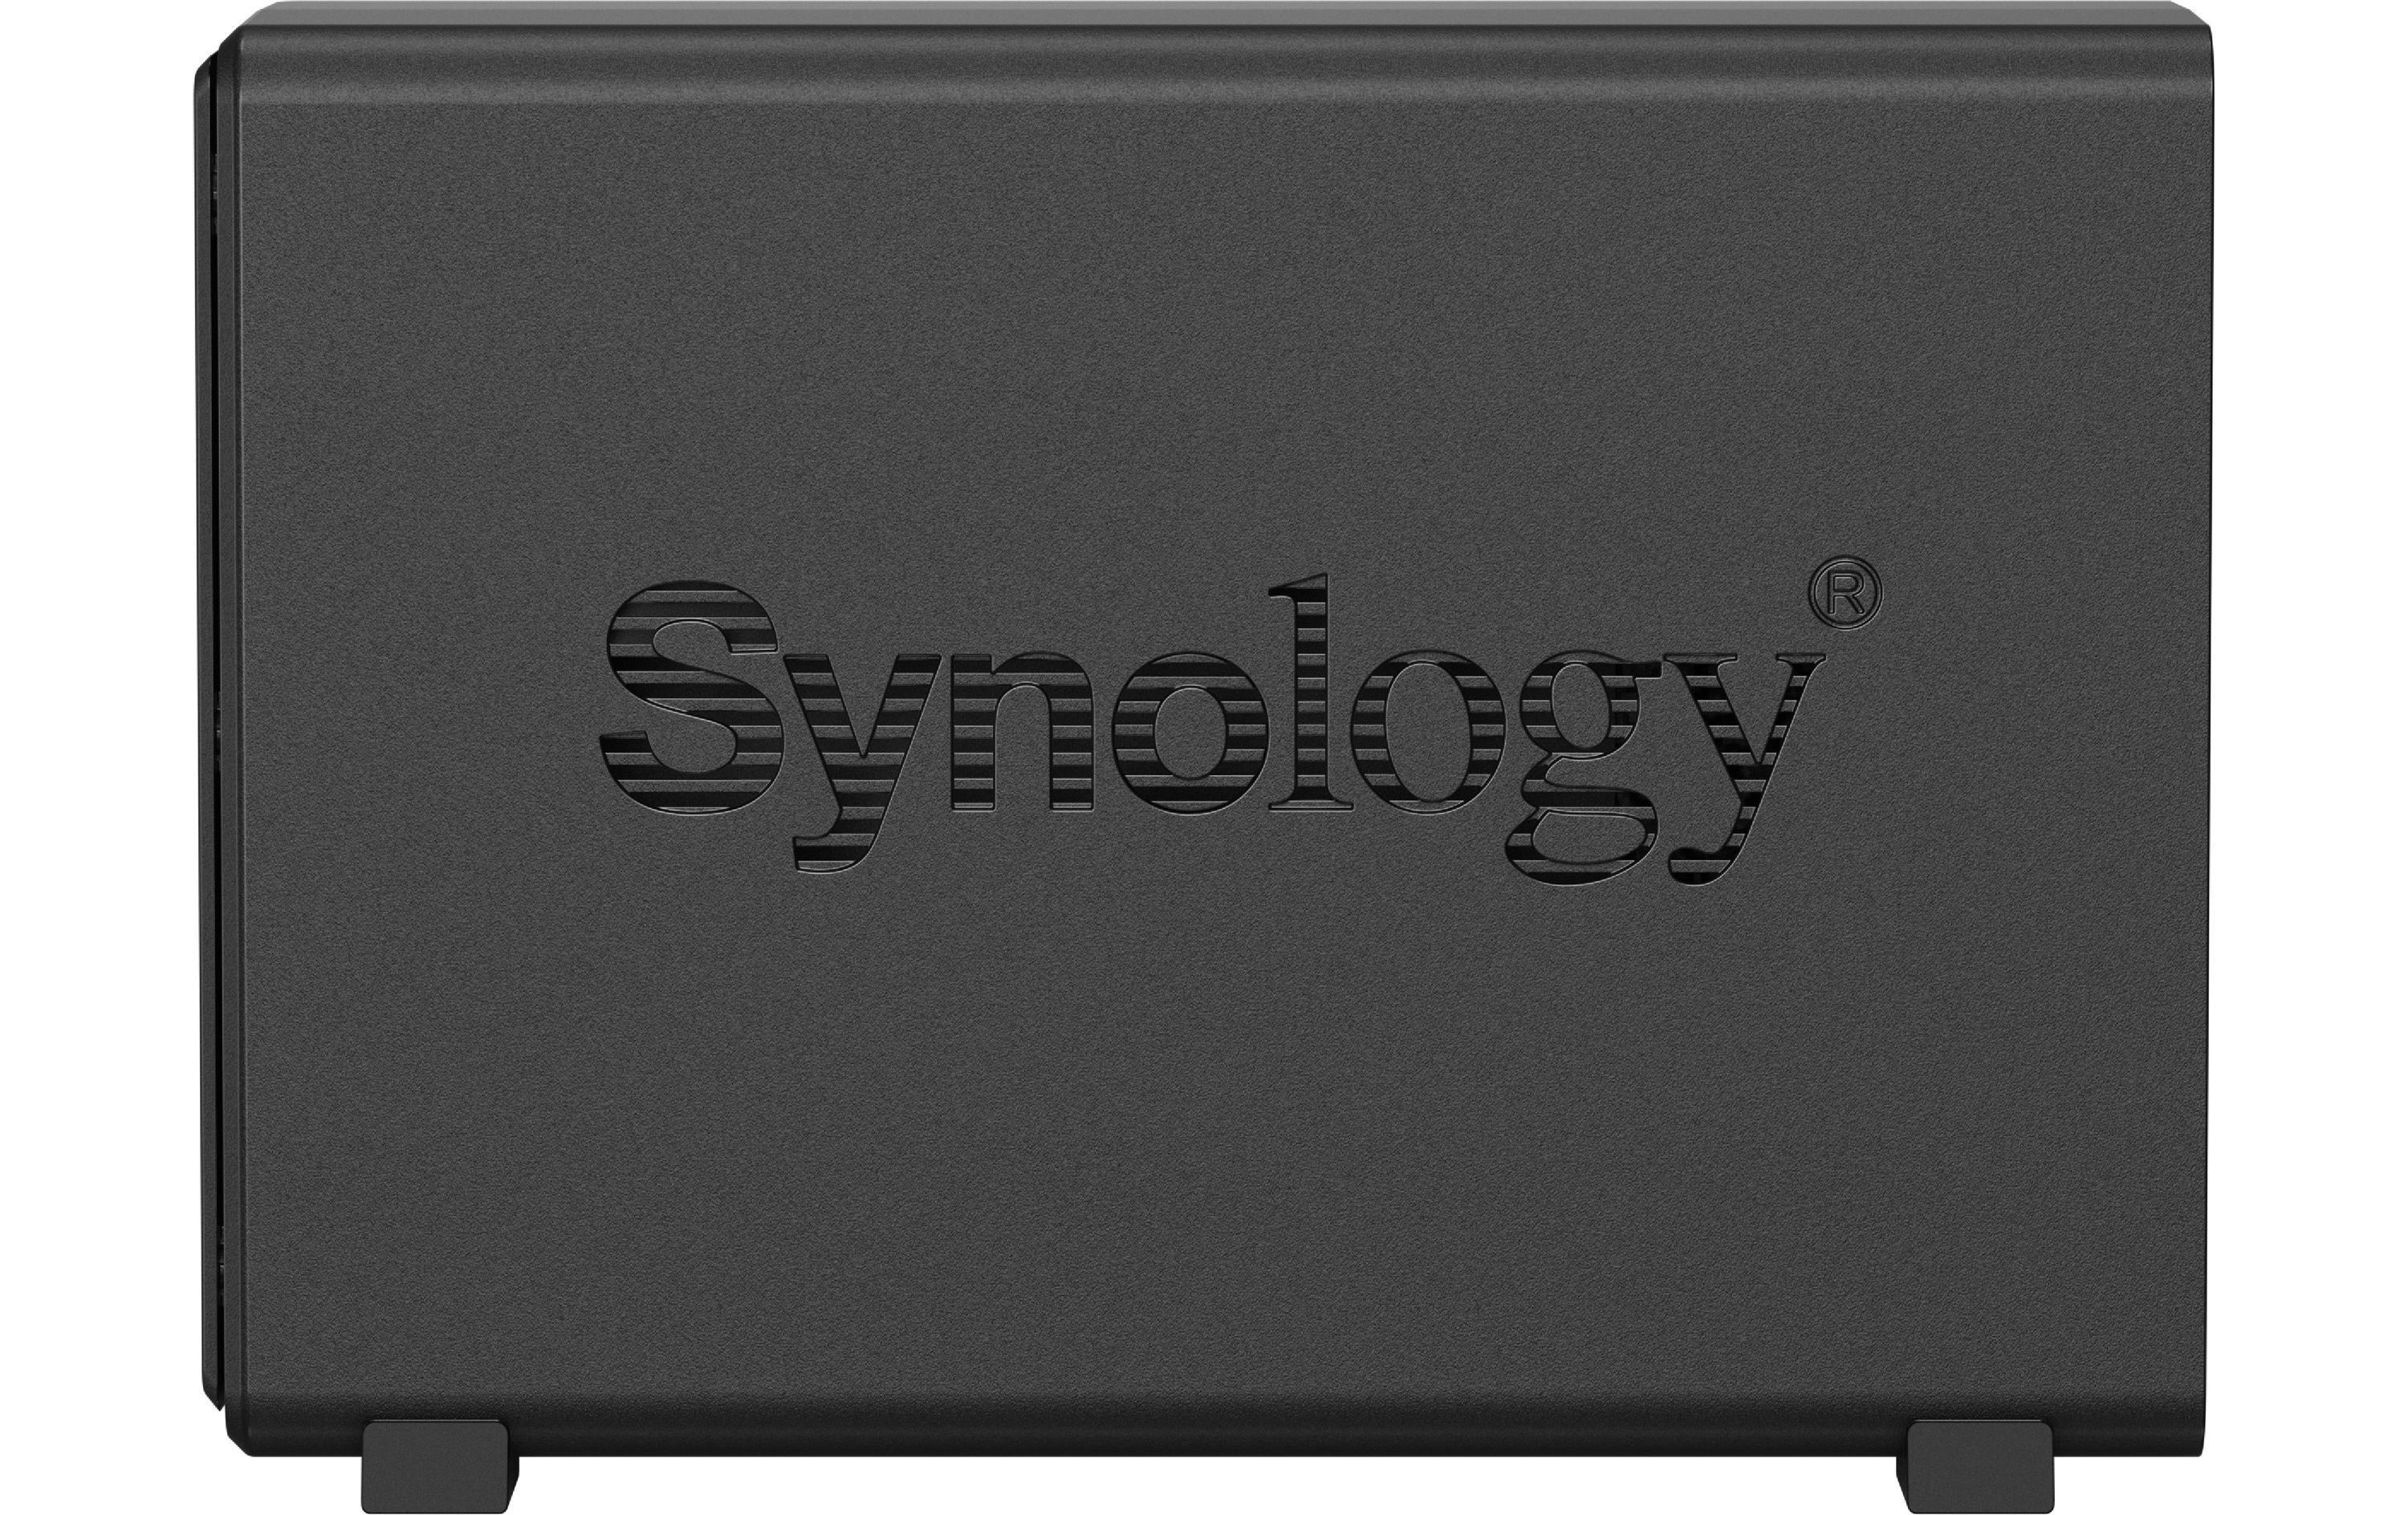 Synology NAS DiskStation DS124 1-bay Synology Plus HDD 8 TB